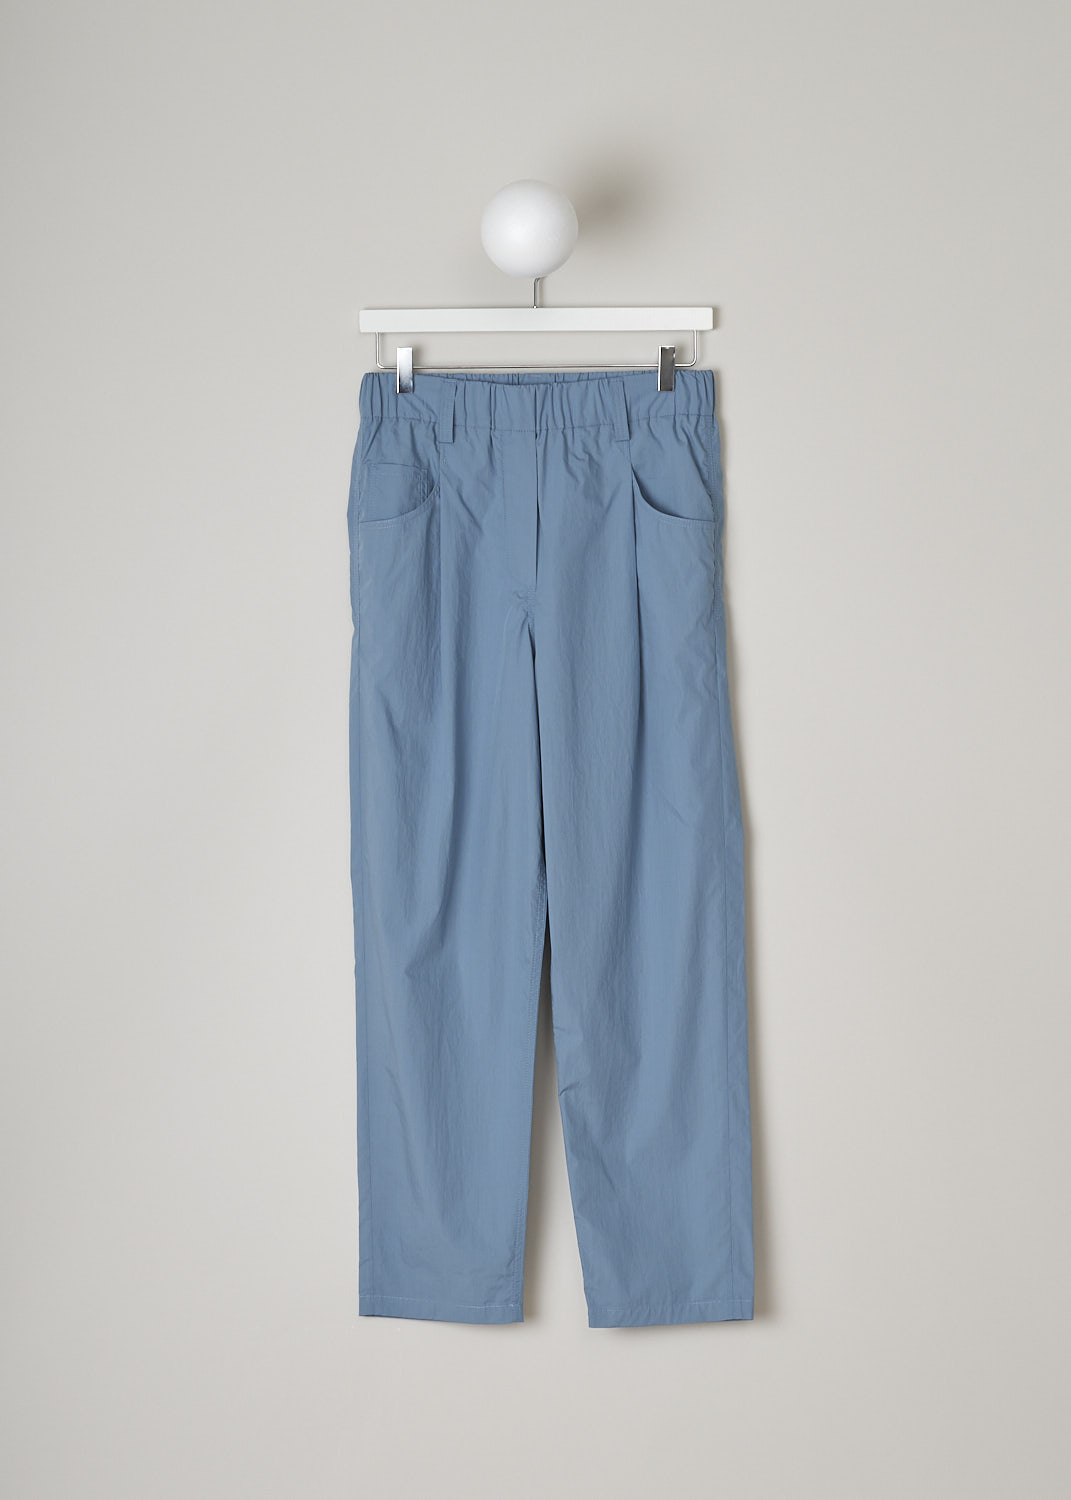 BRUNELLO CUCINELLI, LIGHT BLUE SLIP-ON PANTS, M0H93P7894_C8627, Blue, Front, These light blue slip-on pants have an elasticated waistband with belt loops and a mock-fly stitched on the front. These pants have a traditional five pocket configuration, with two pockets and a single coin pocket in the front and two patch pockets in the back. The straight cropped pant legs have front pleats. 
